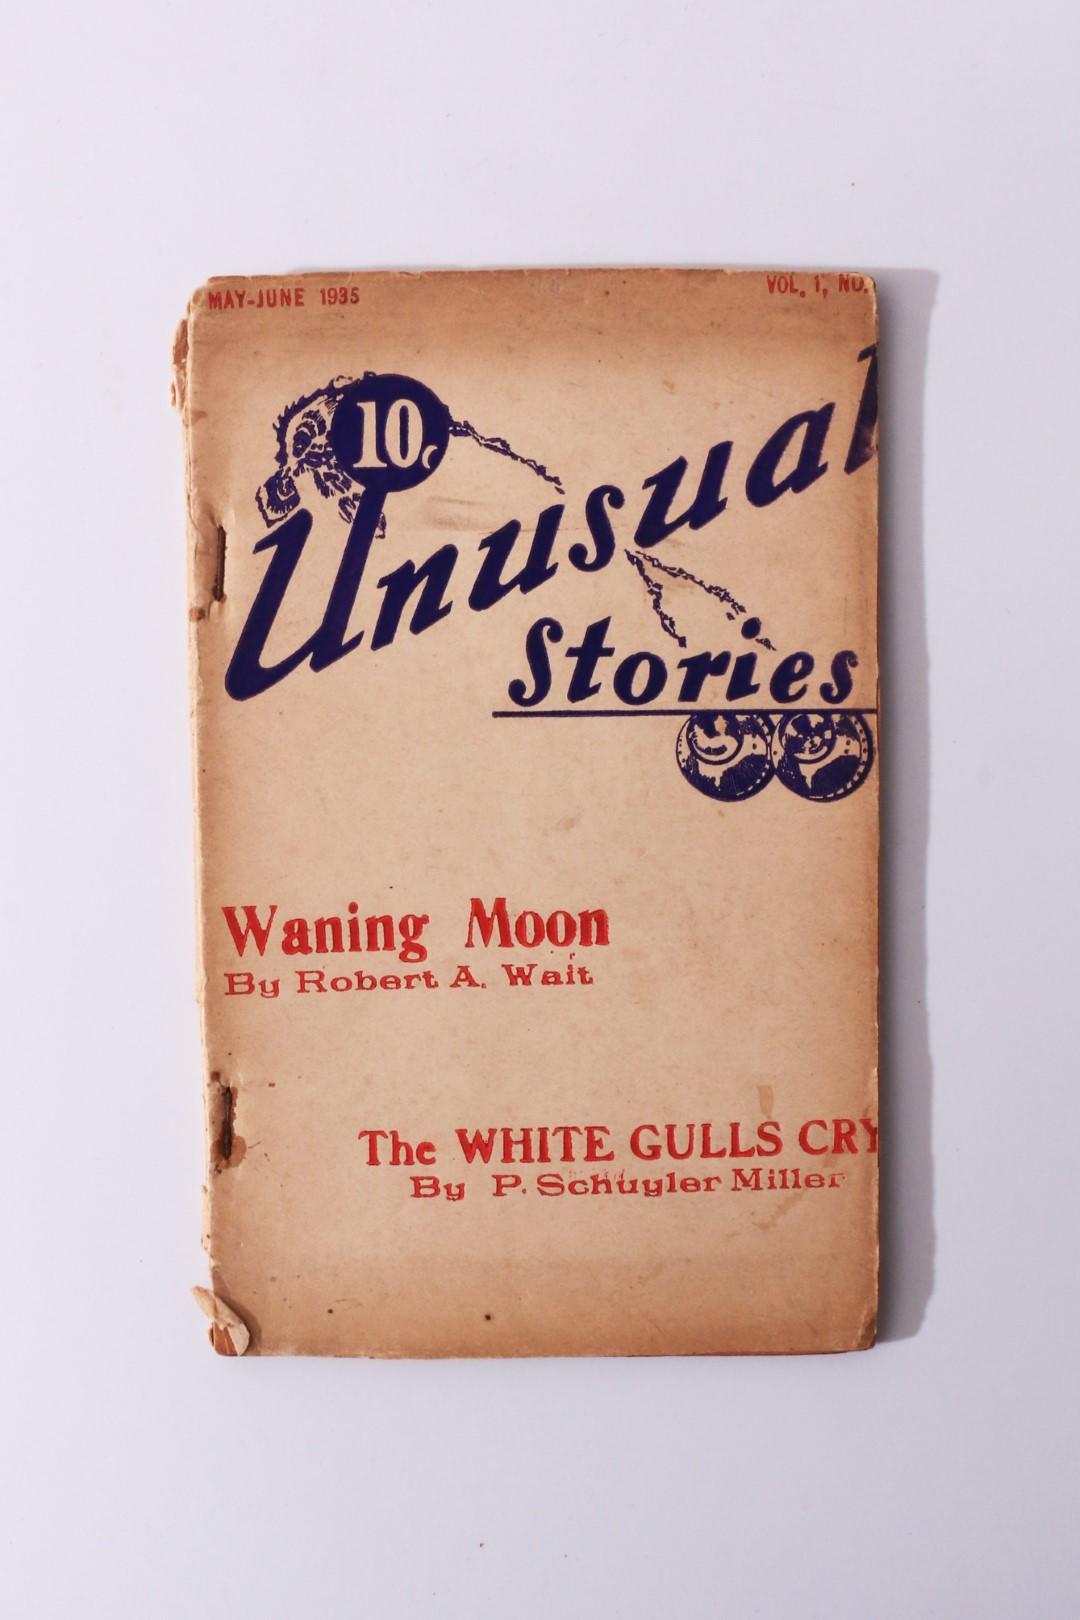 Various - Unusual Stories, Volume I number I, 1935 - Fantasy Publications, 1935, First Edition.